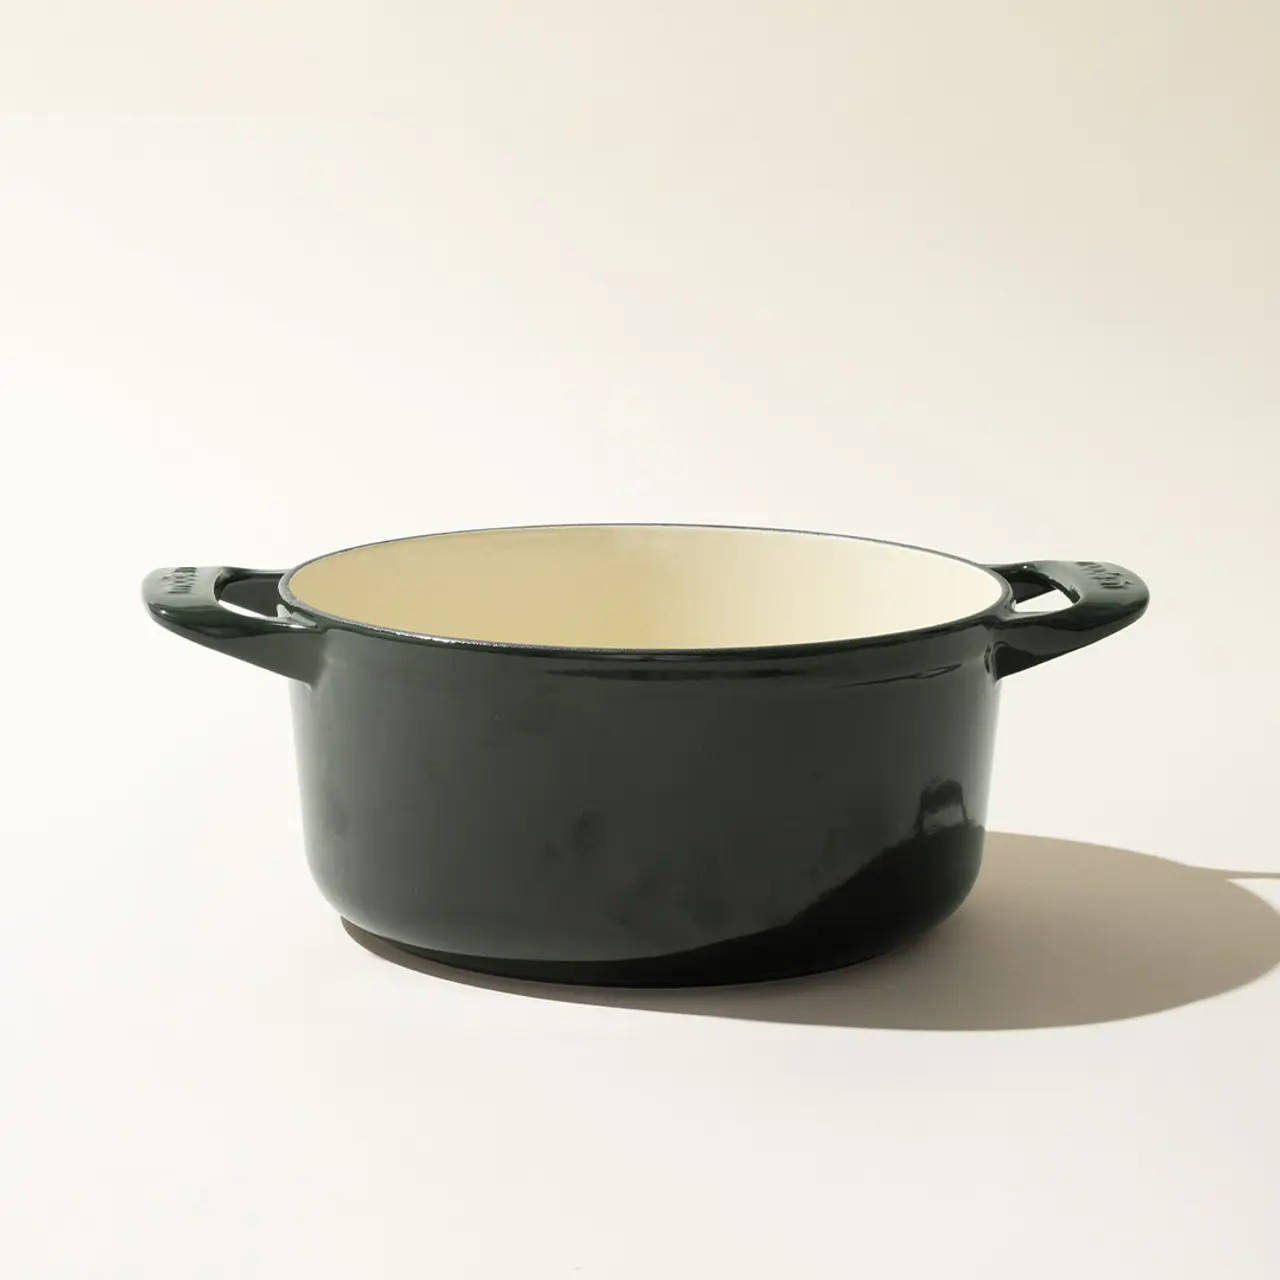 A simple dark-colored cooking pot with two handles placed against a light background.